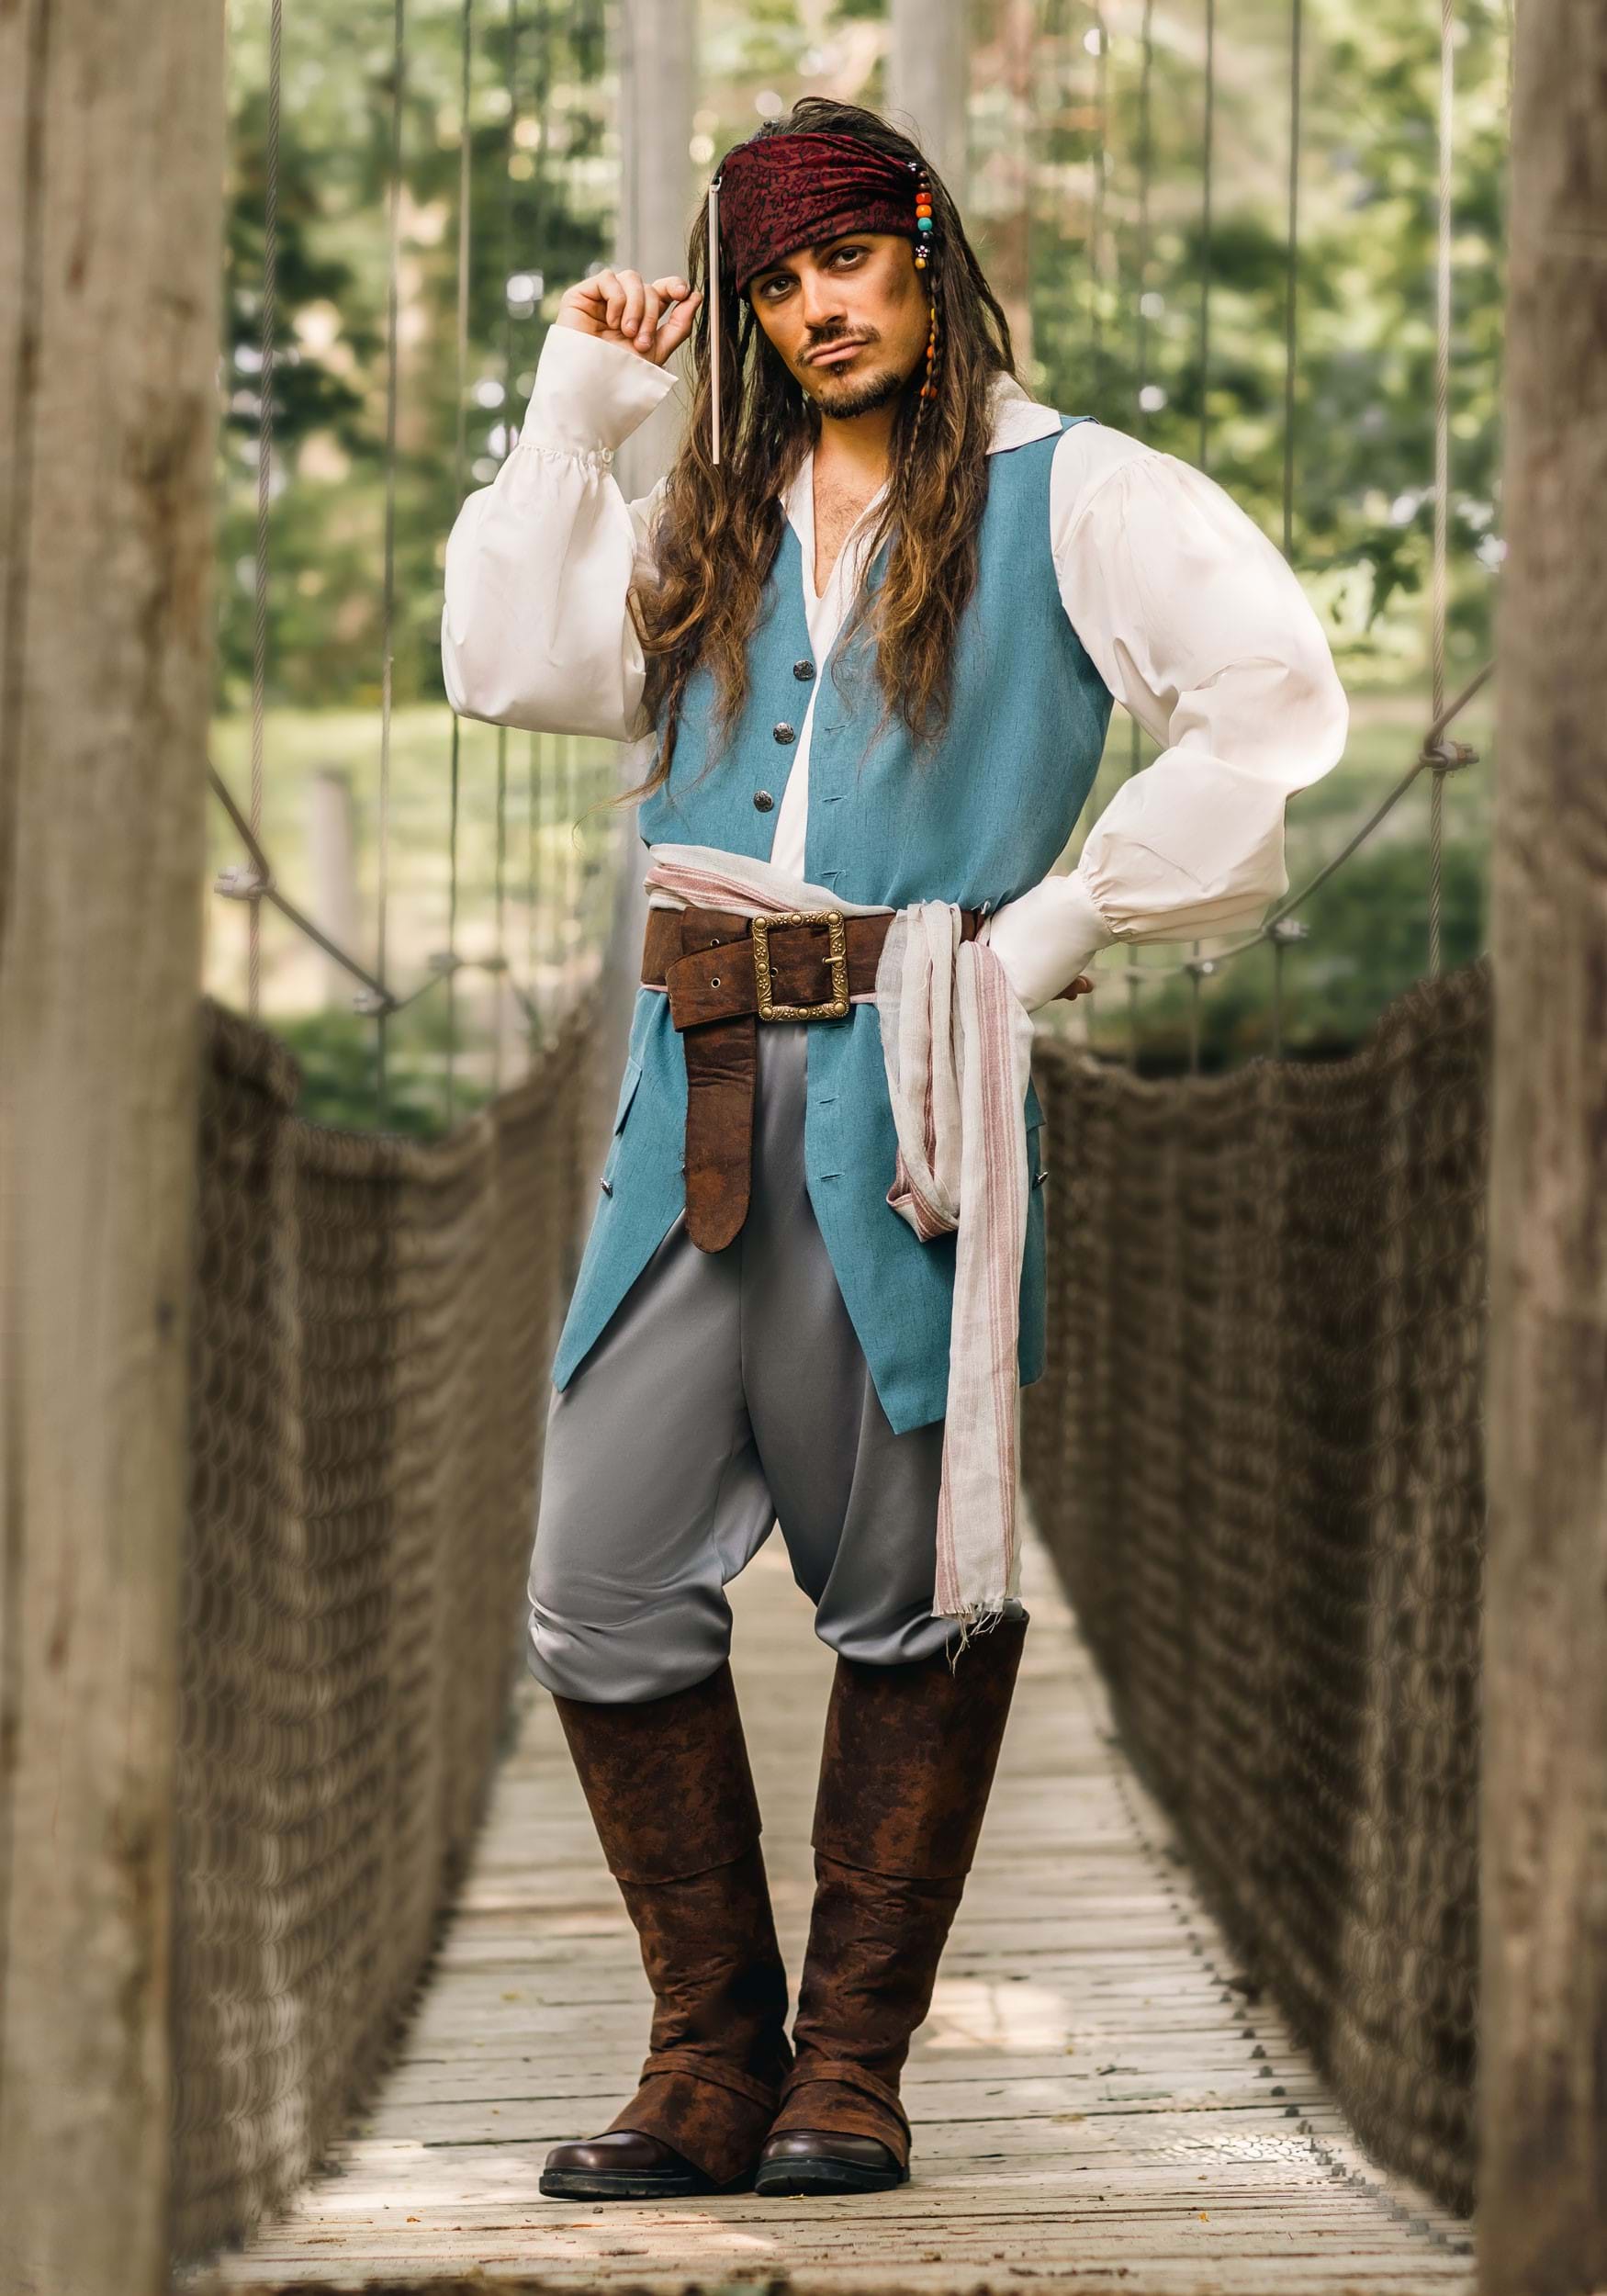 Adult Caribbean Pirate Captain Jack Sparrow Fancy DRESS UP HAT With Hair Costume 